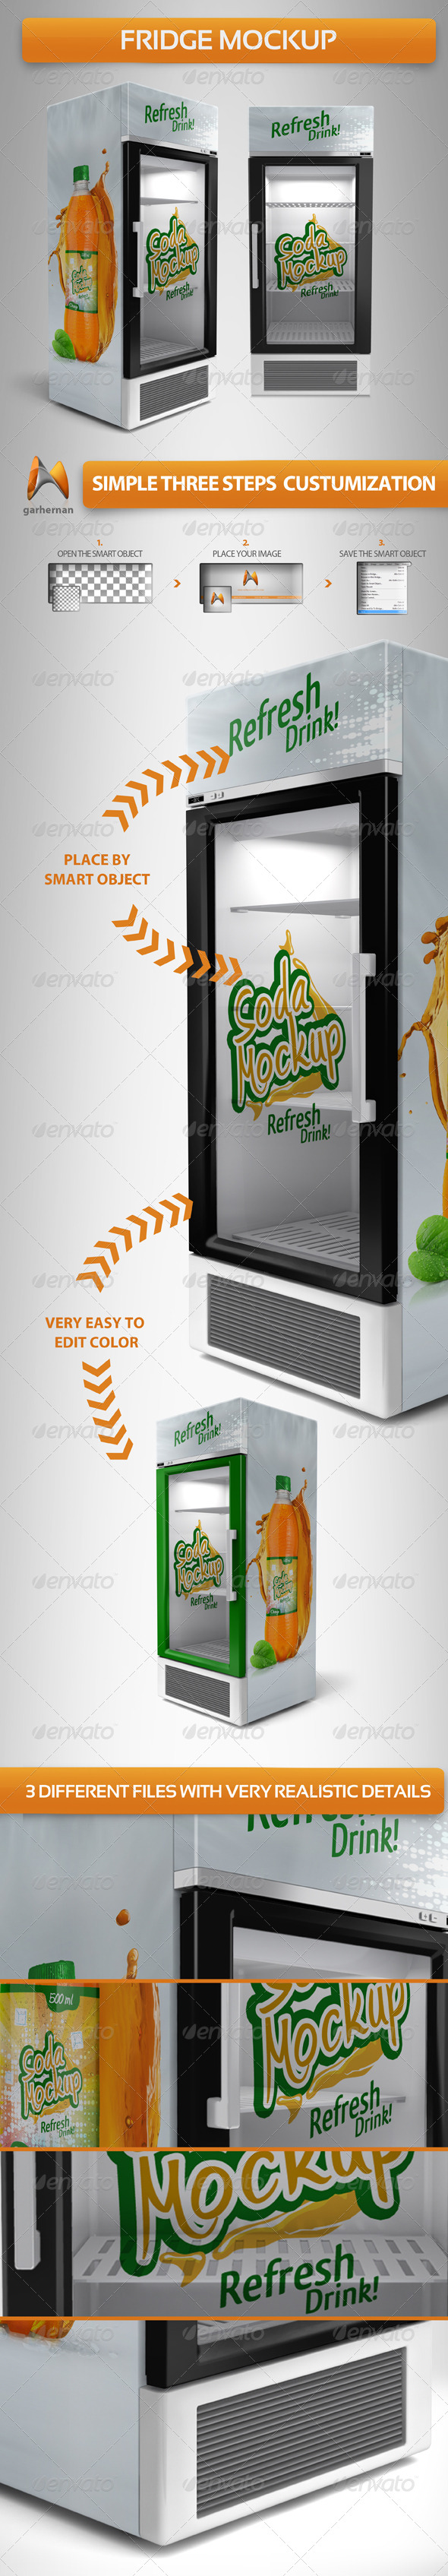 Download Psd Xl Fridge Mockup With Energy Drink Soda Cans Free » Tinkytyler.org - Stock Photos & Graphics